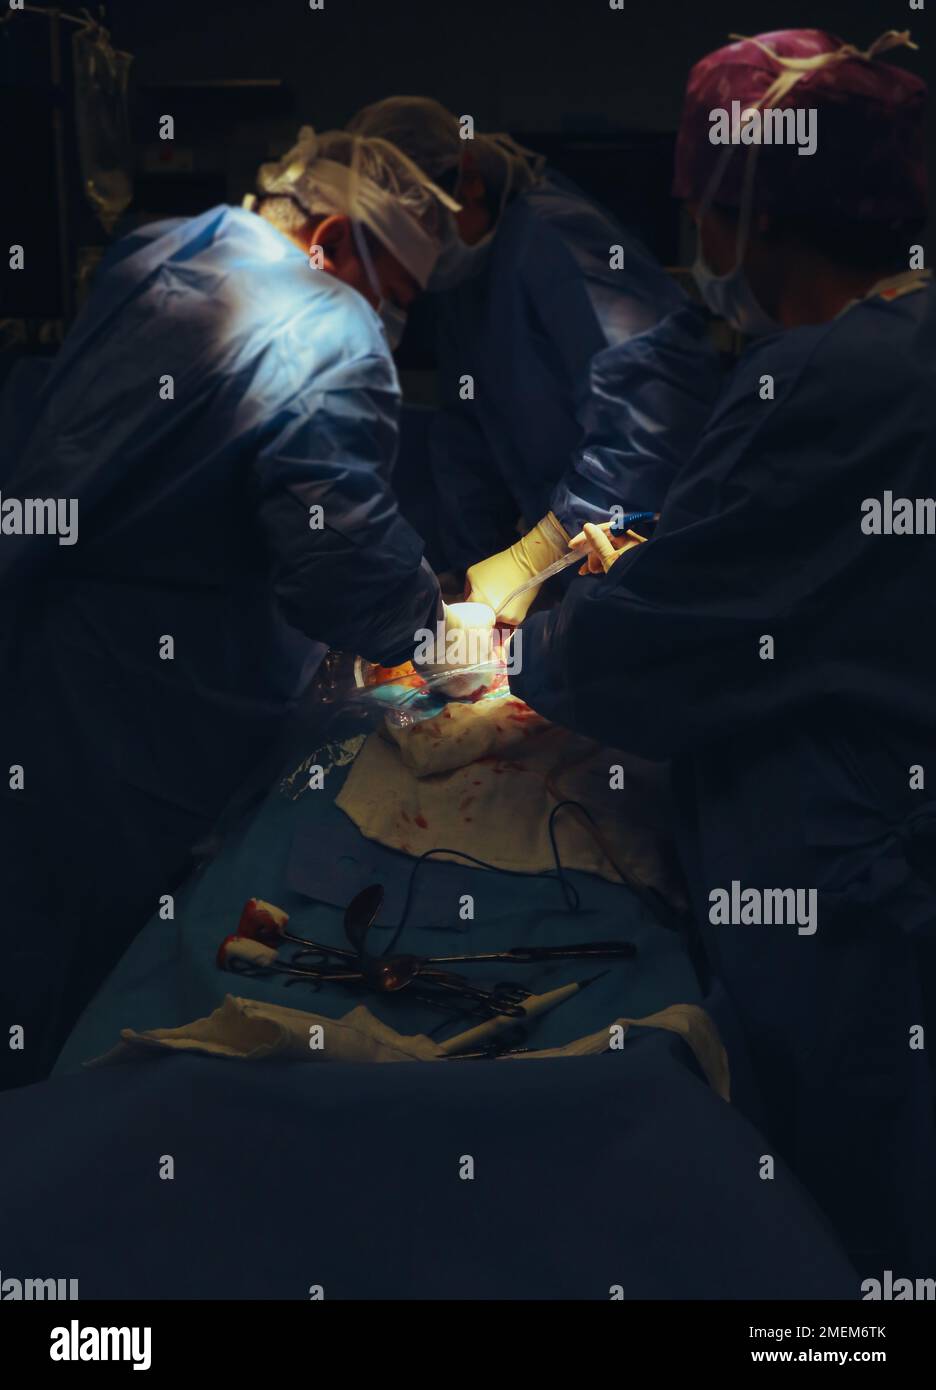 Classic cesarean section in the operating theater, labor room, newborn baby in delivery room Stock Photo